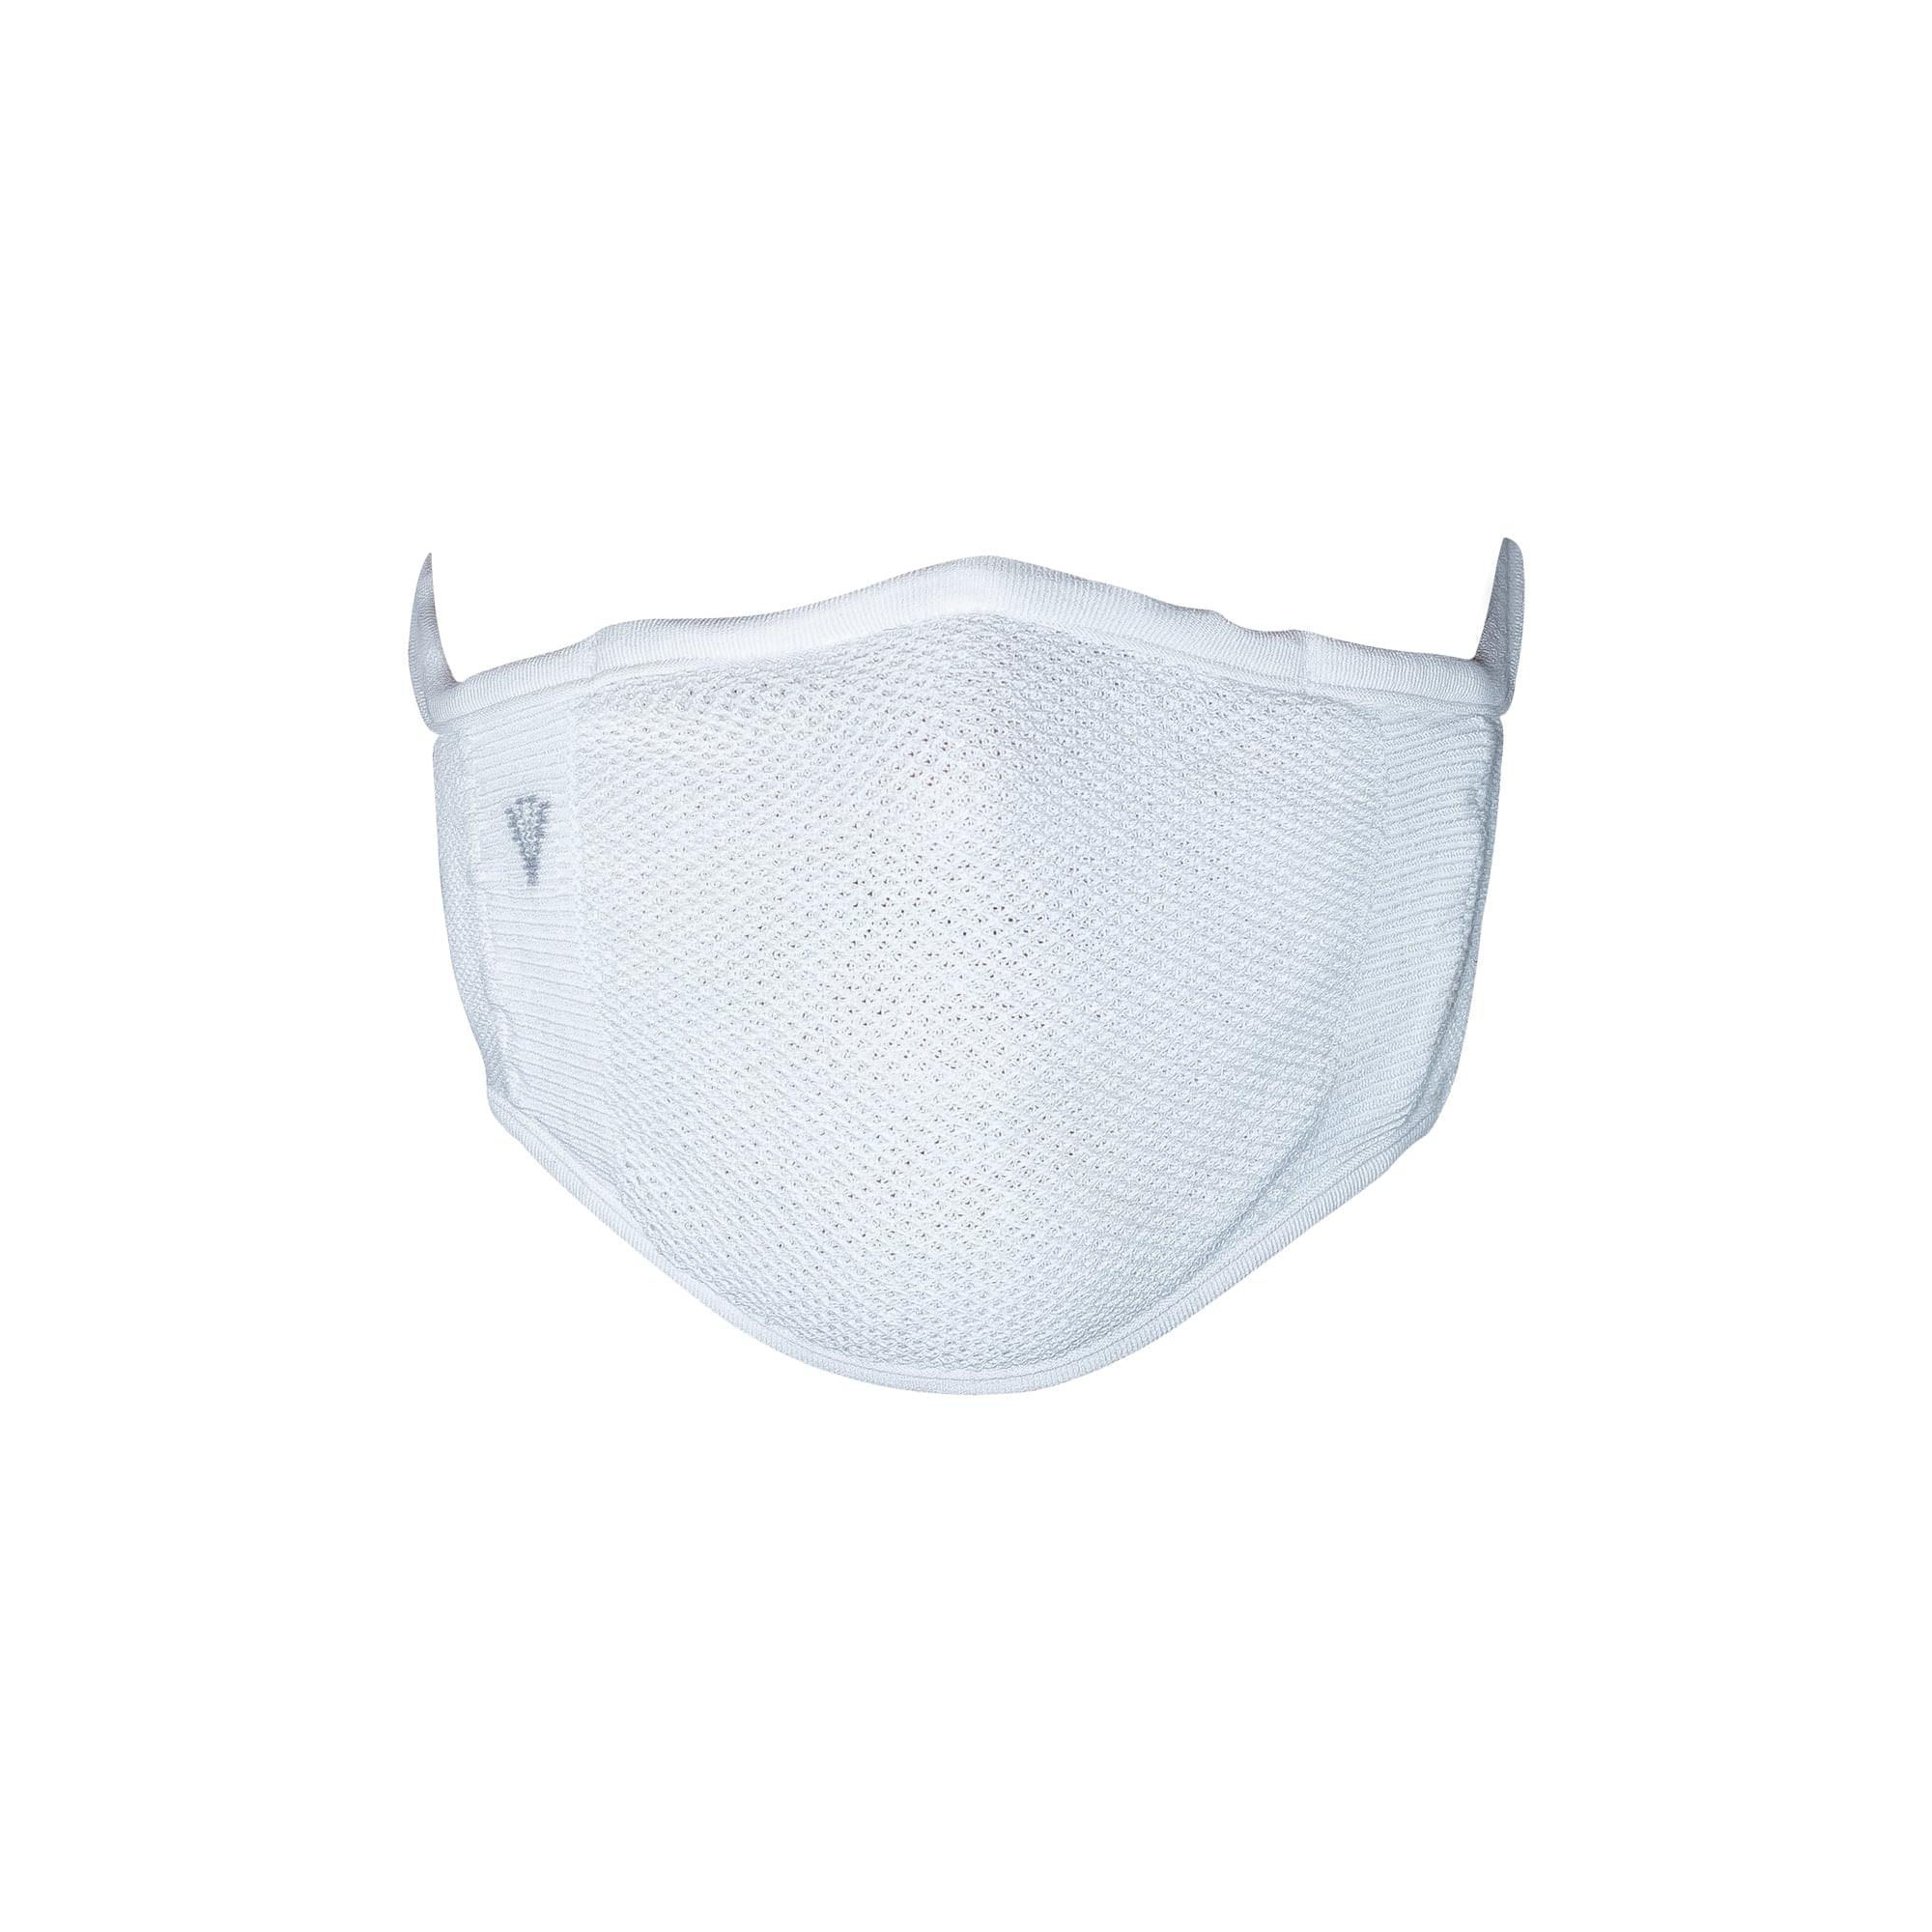 4-Layer Anti-Bacterial Protection Mask for Adults (Unisex) - Pack of 2